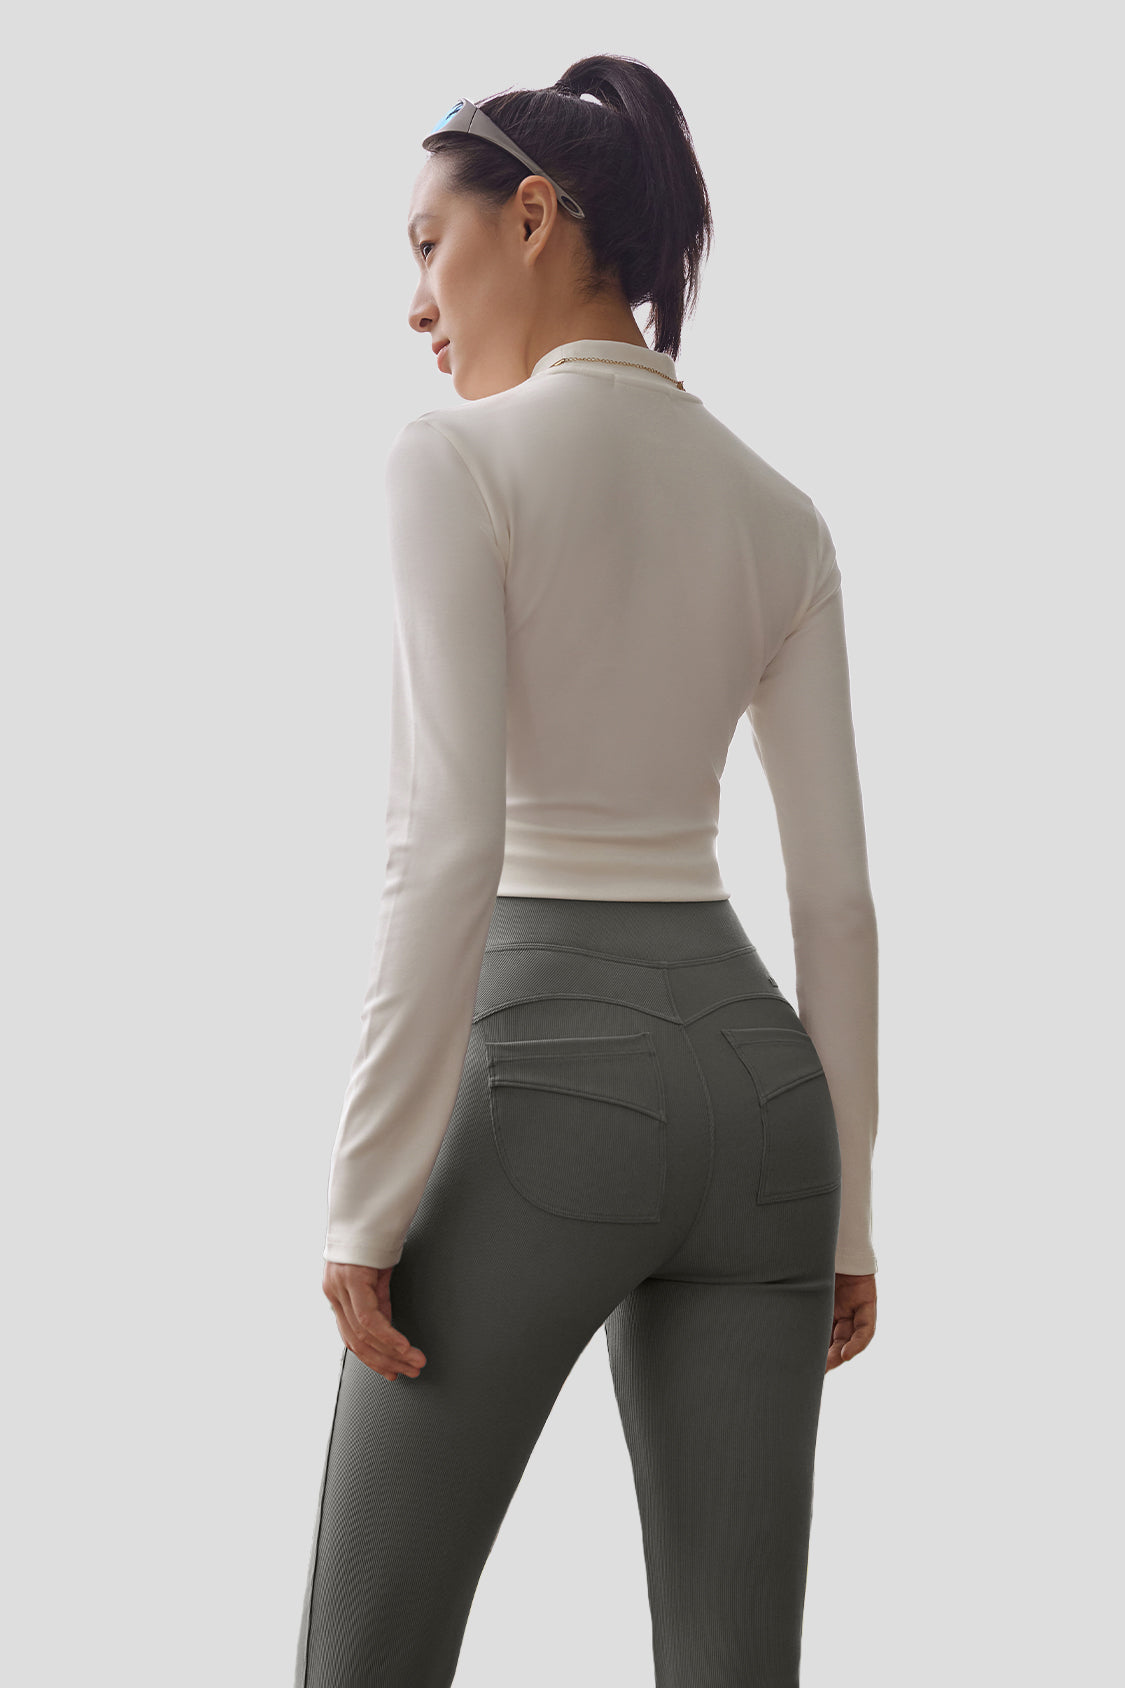 Yun Stretchy - Women's High Waisted Thermal Leggings